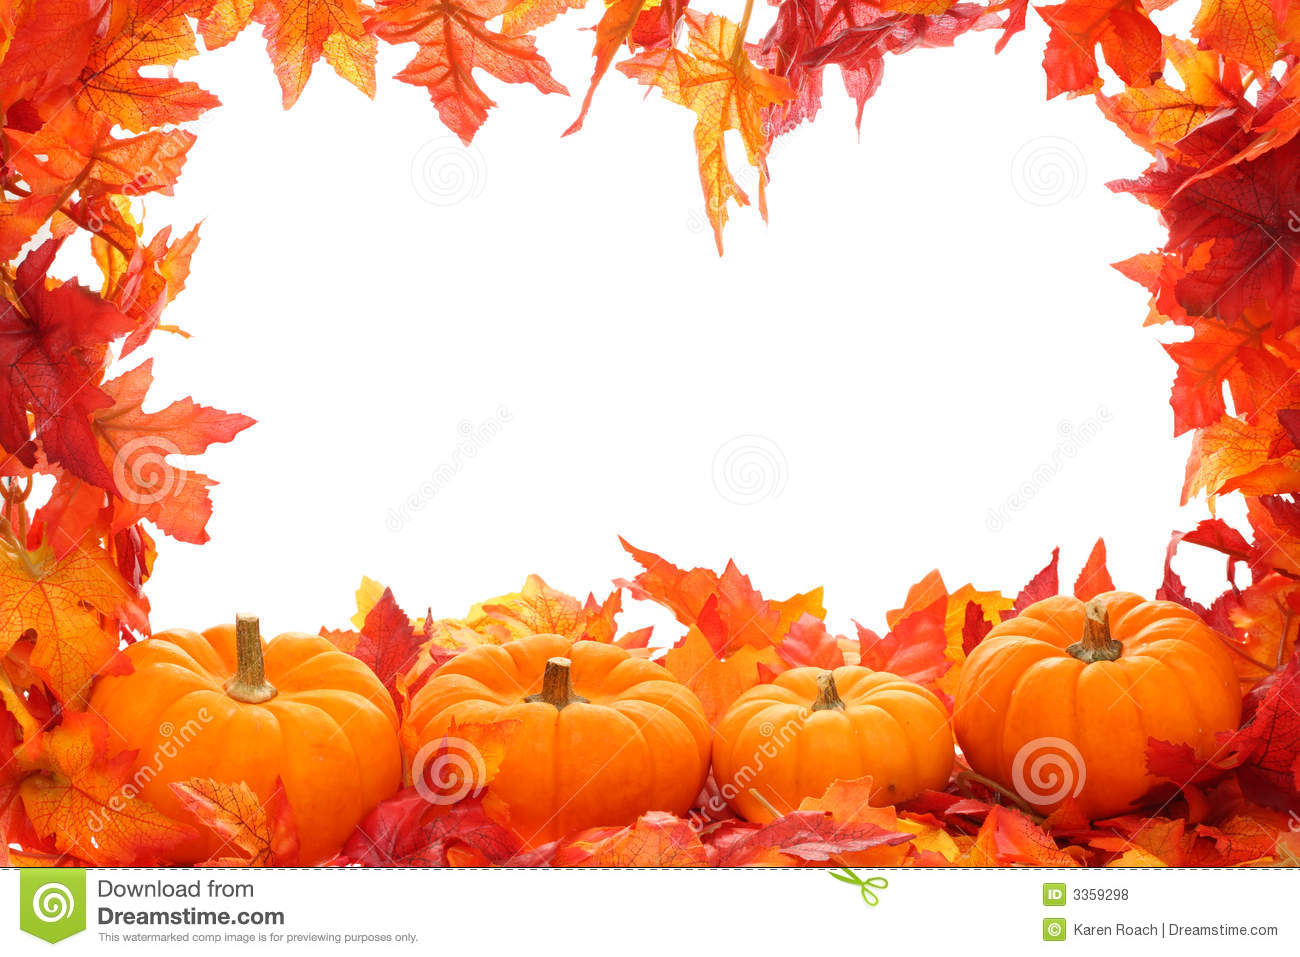 fall pictures background #10